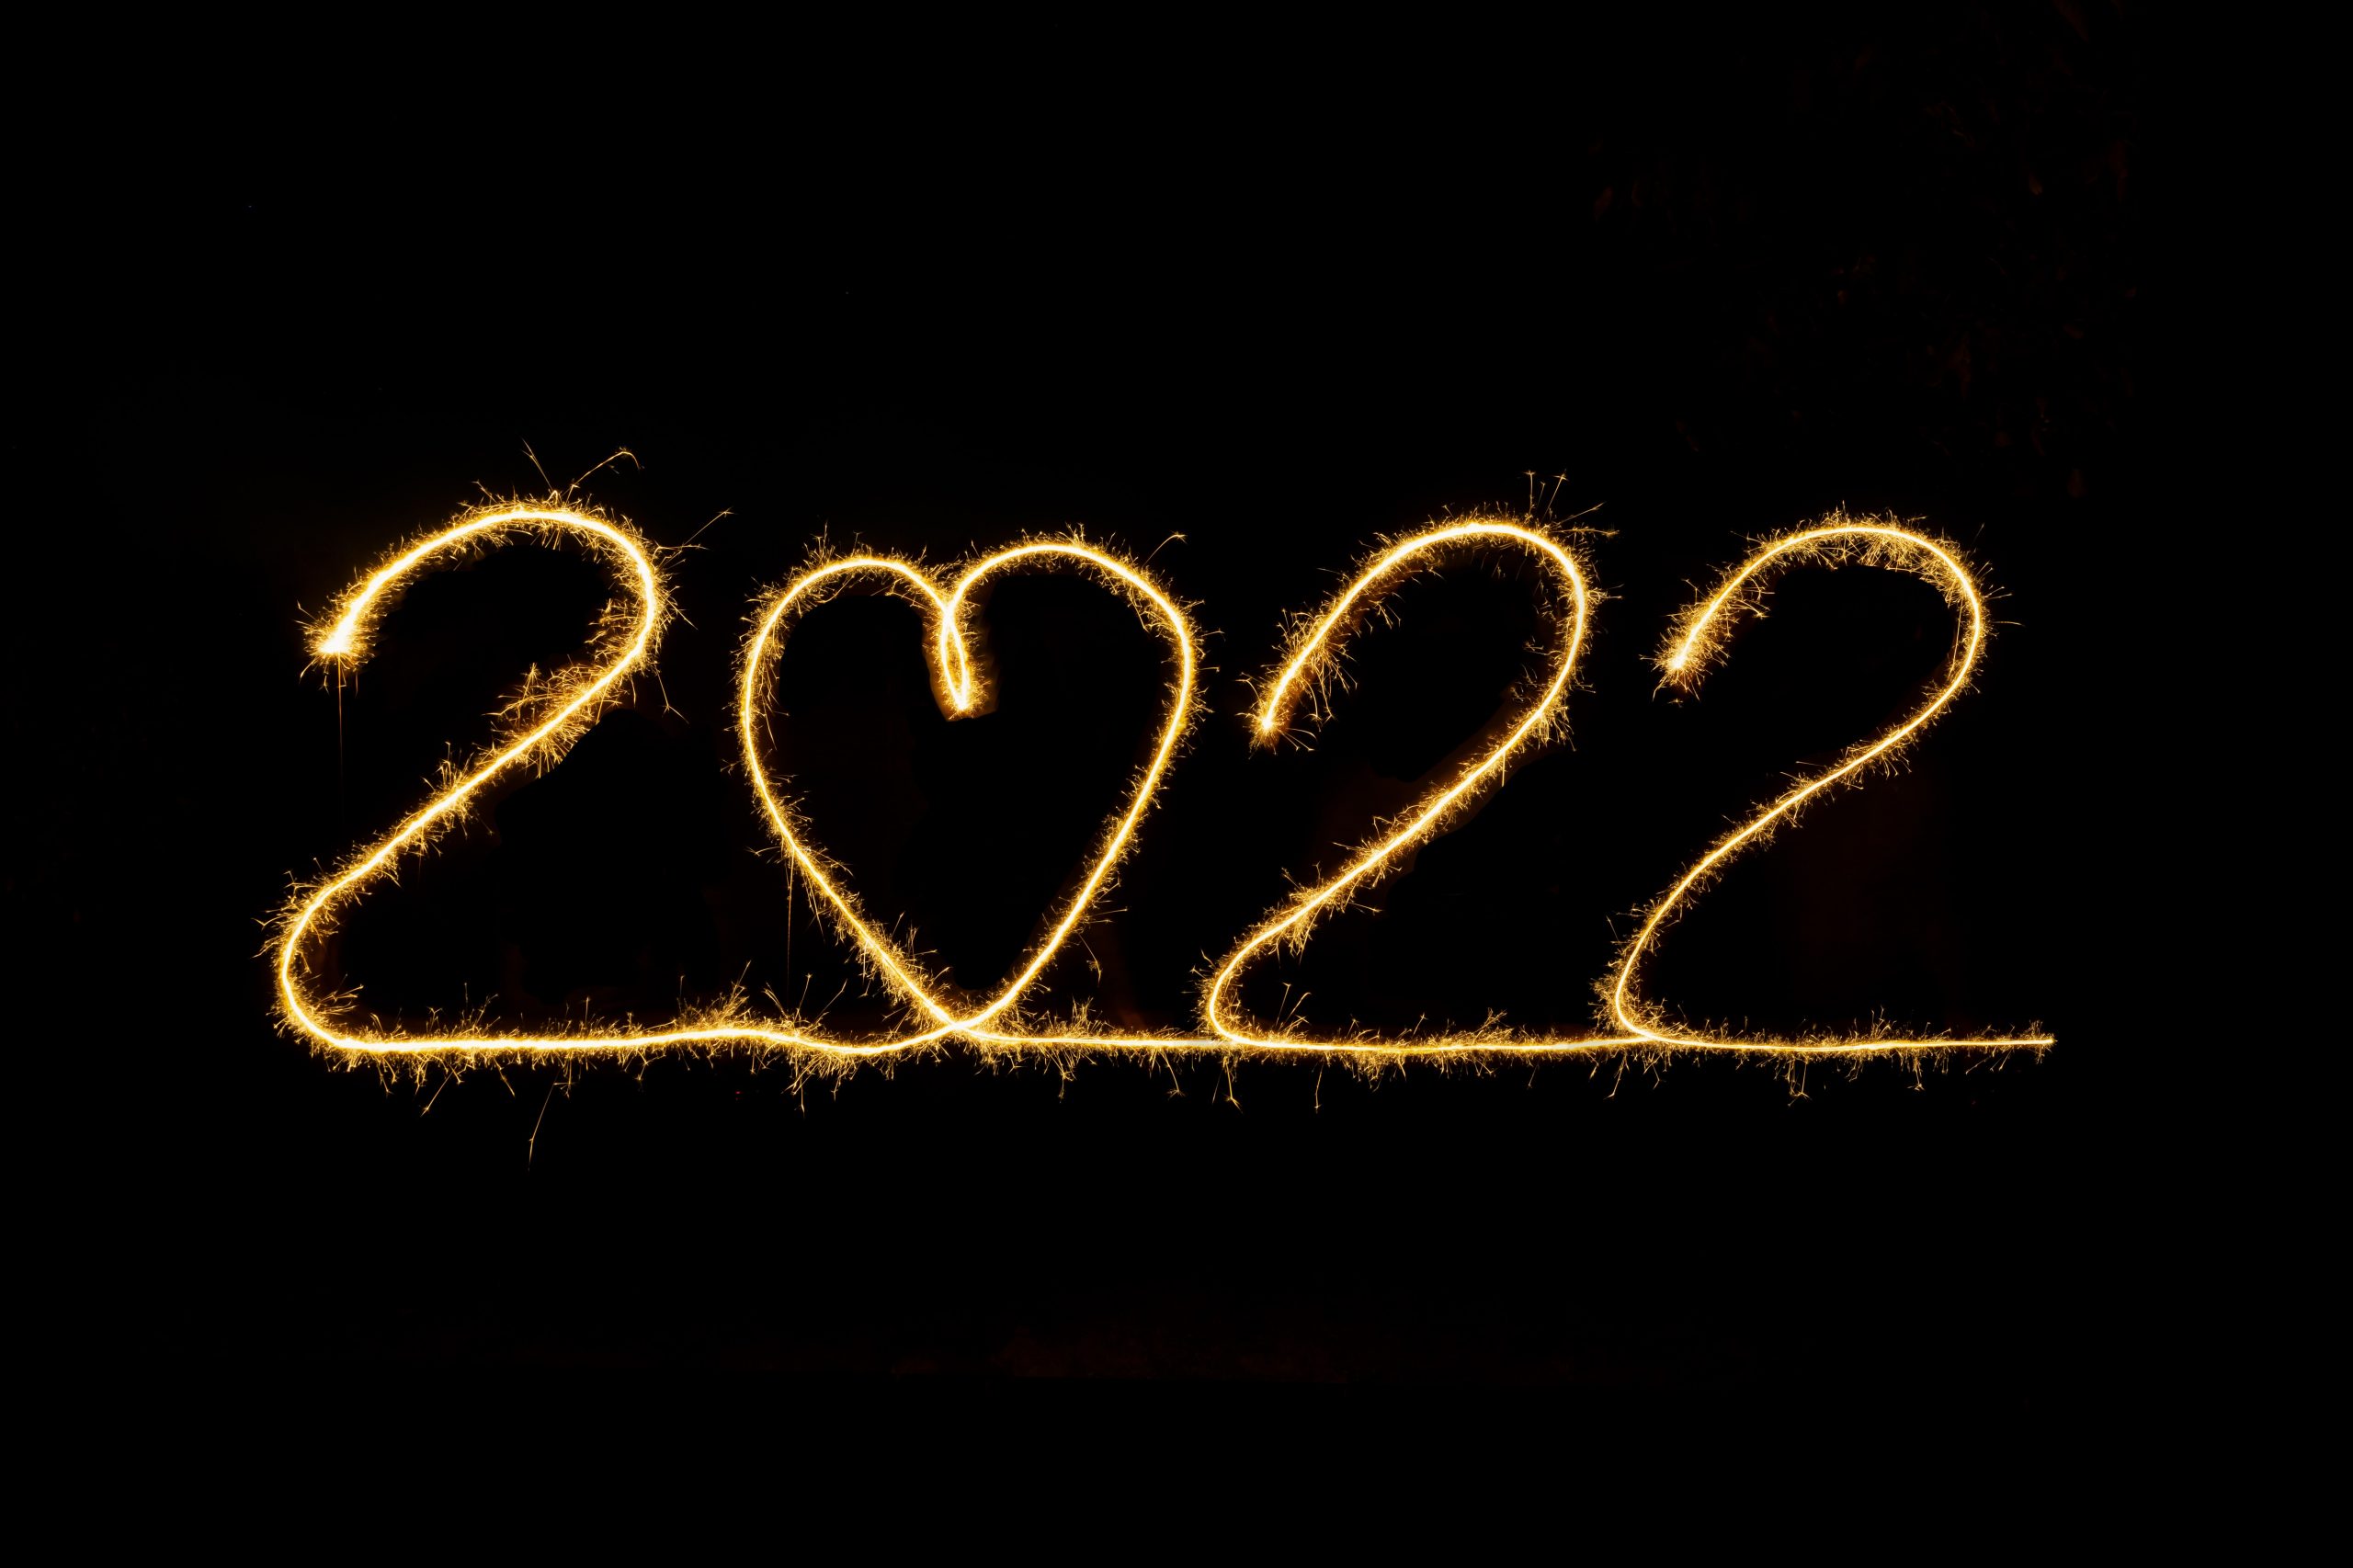 "2022" written in the sky using gold sparklers. with the 0 as a heart; Struggling For A New Year's Resolution